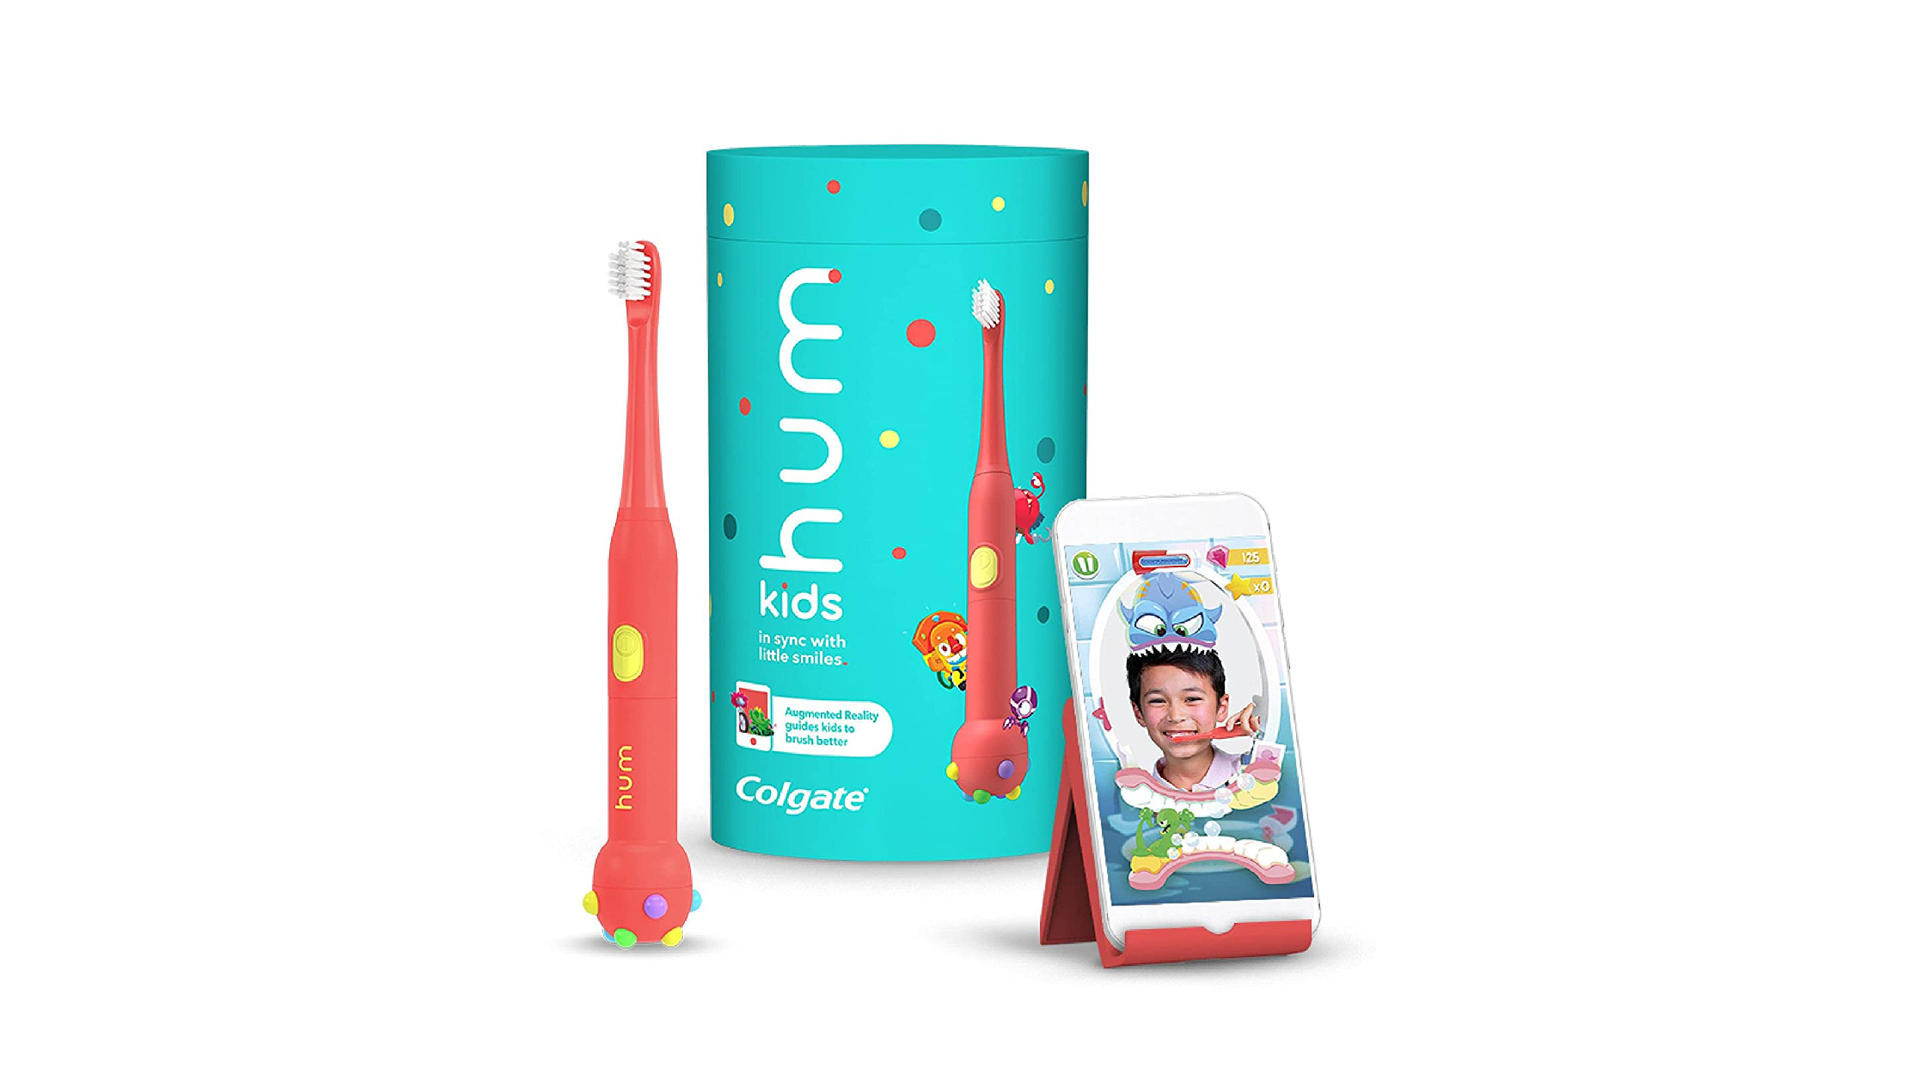 Best electric toothbrushes for kids: Colgate Hum Kids